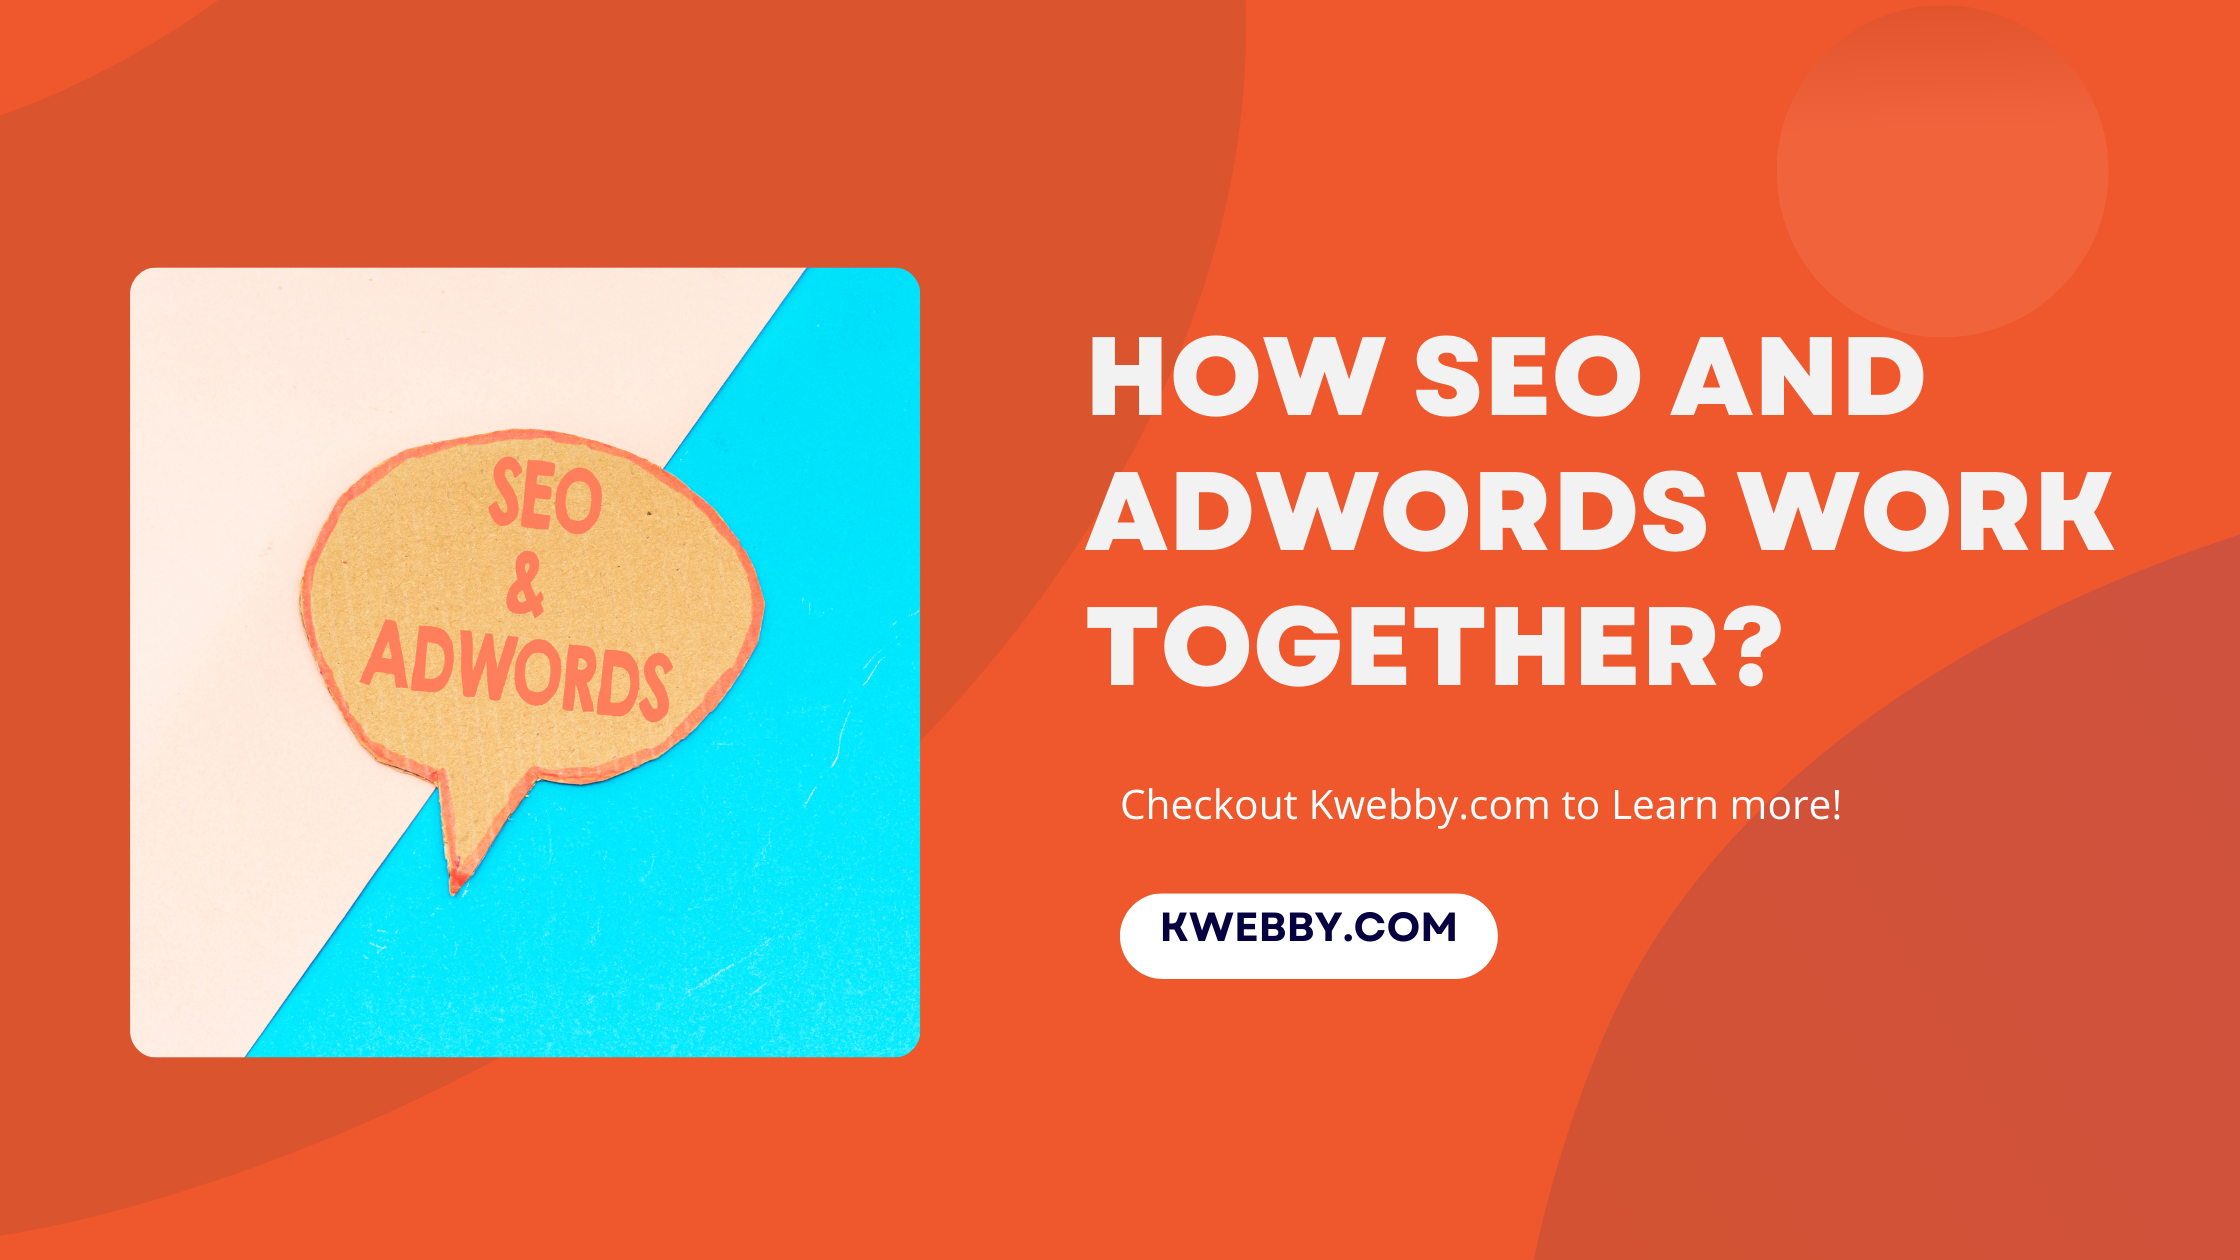 How SEO and Adwords work together?